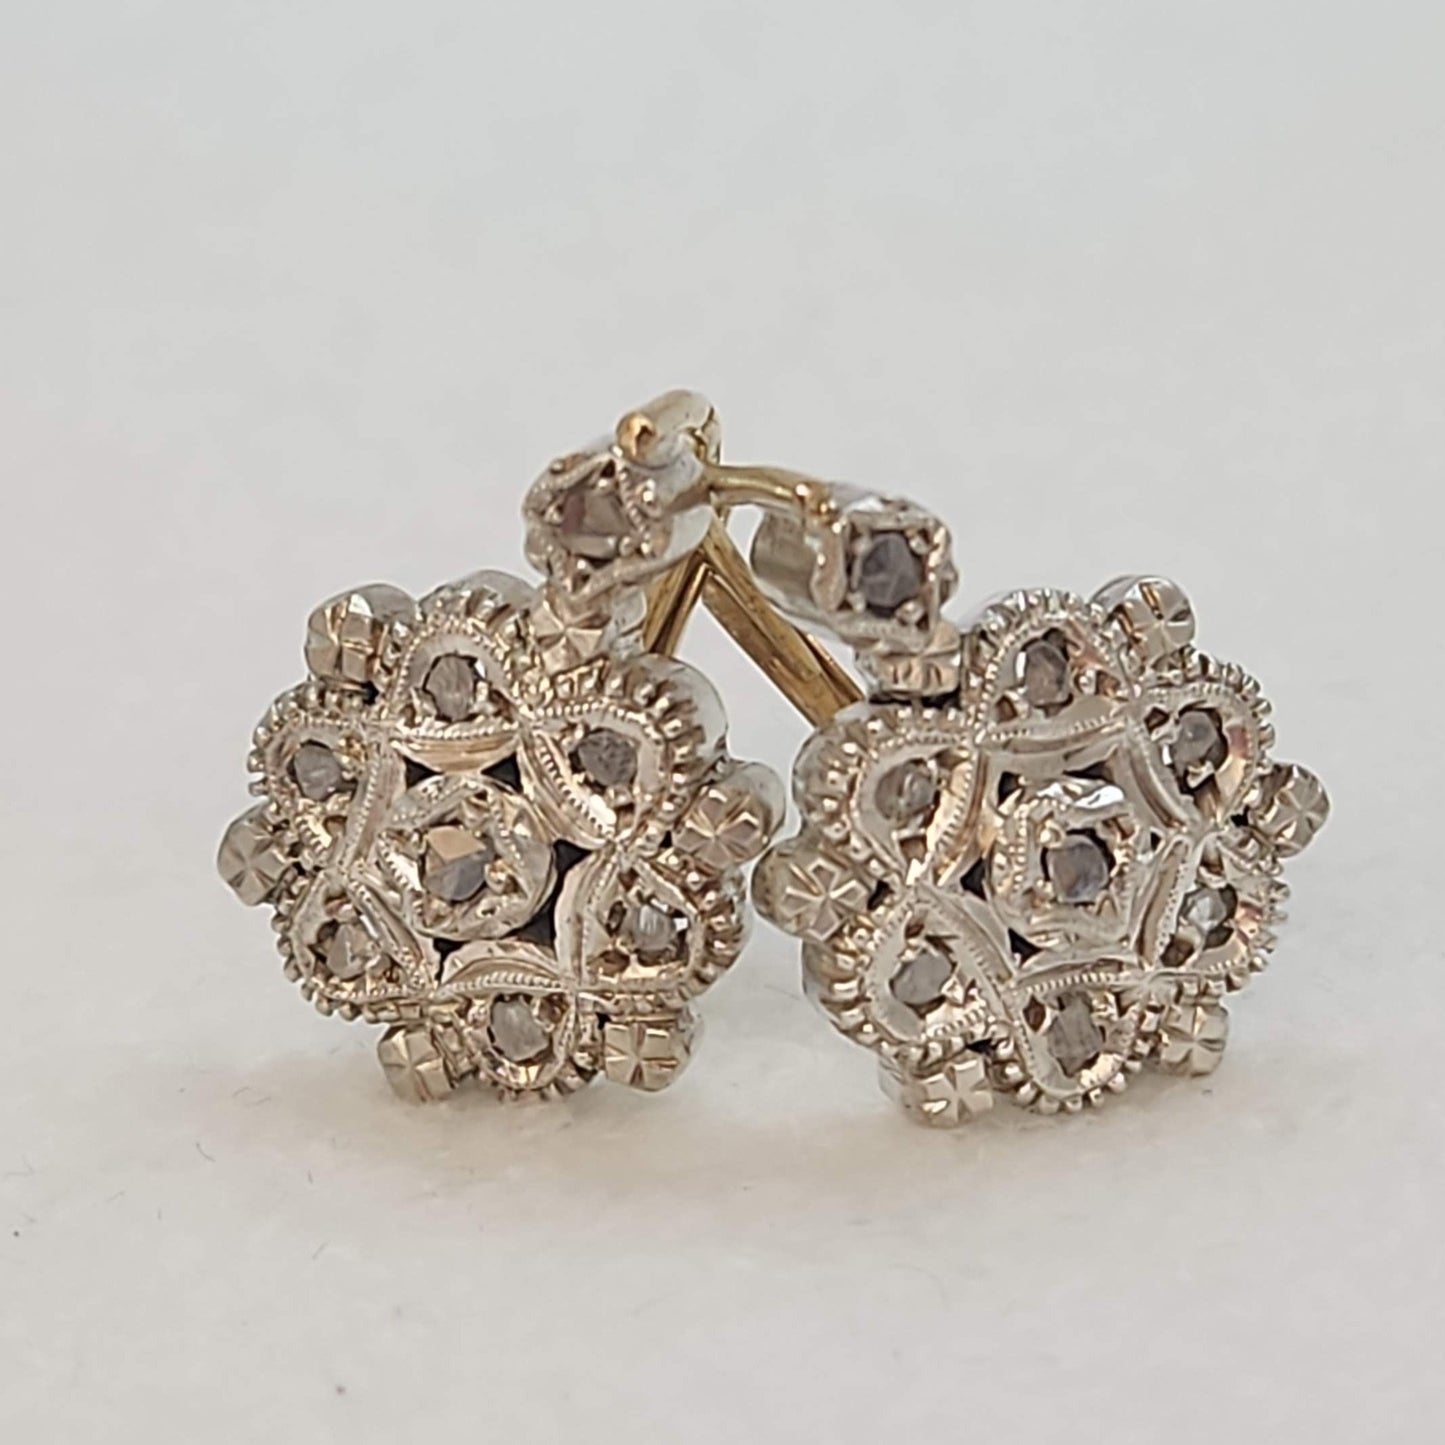 1900s Silver and 9K Gold Earrings